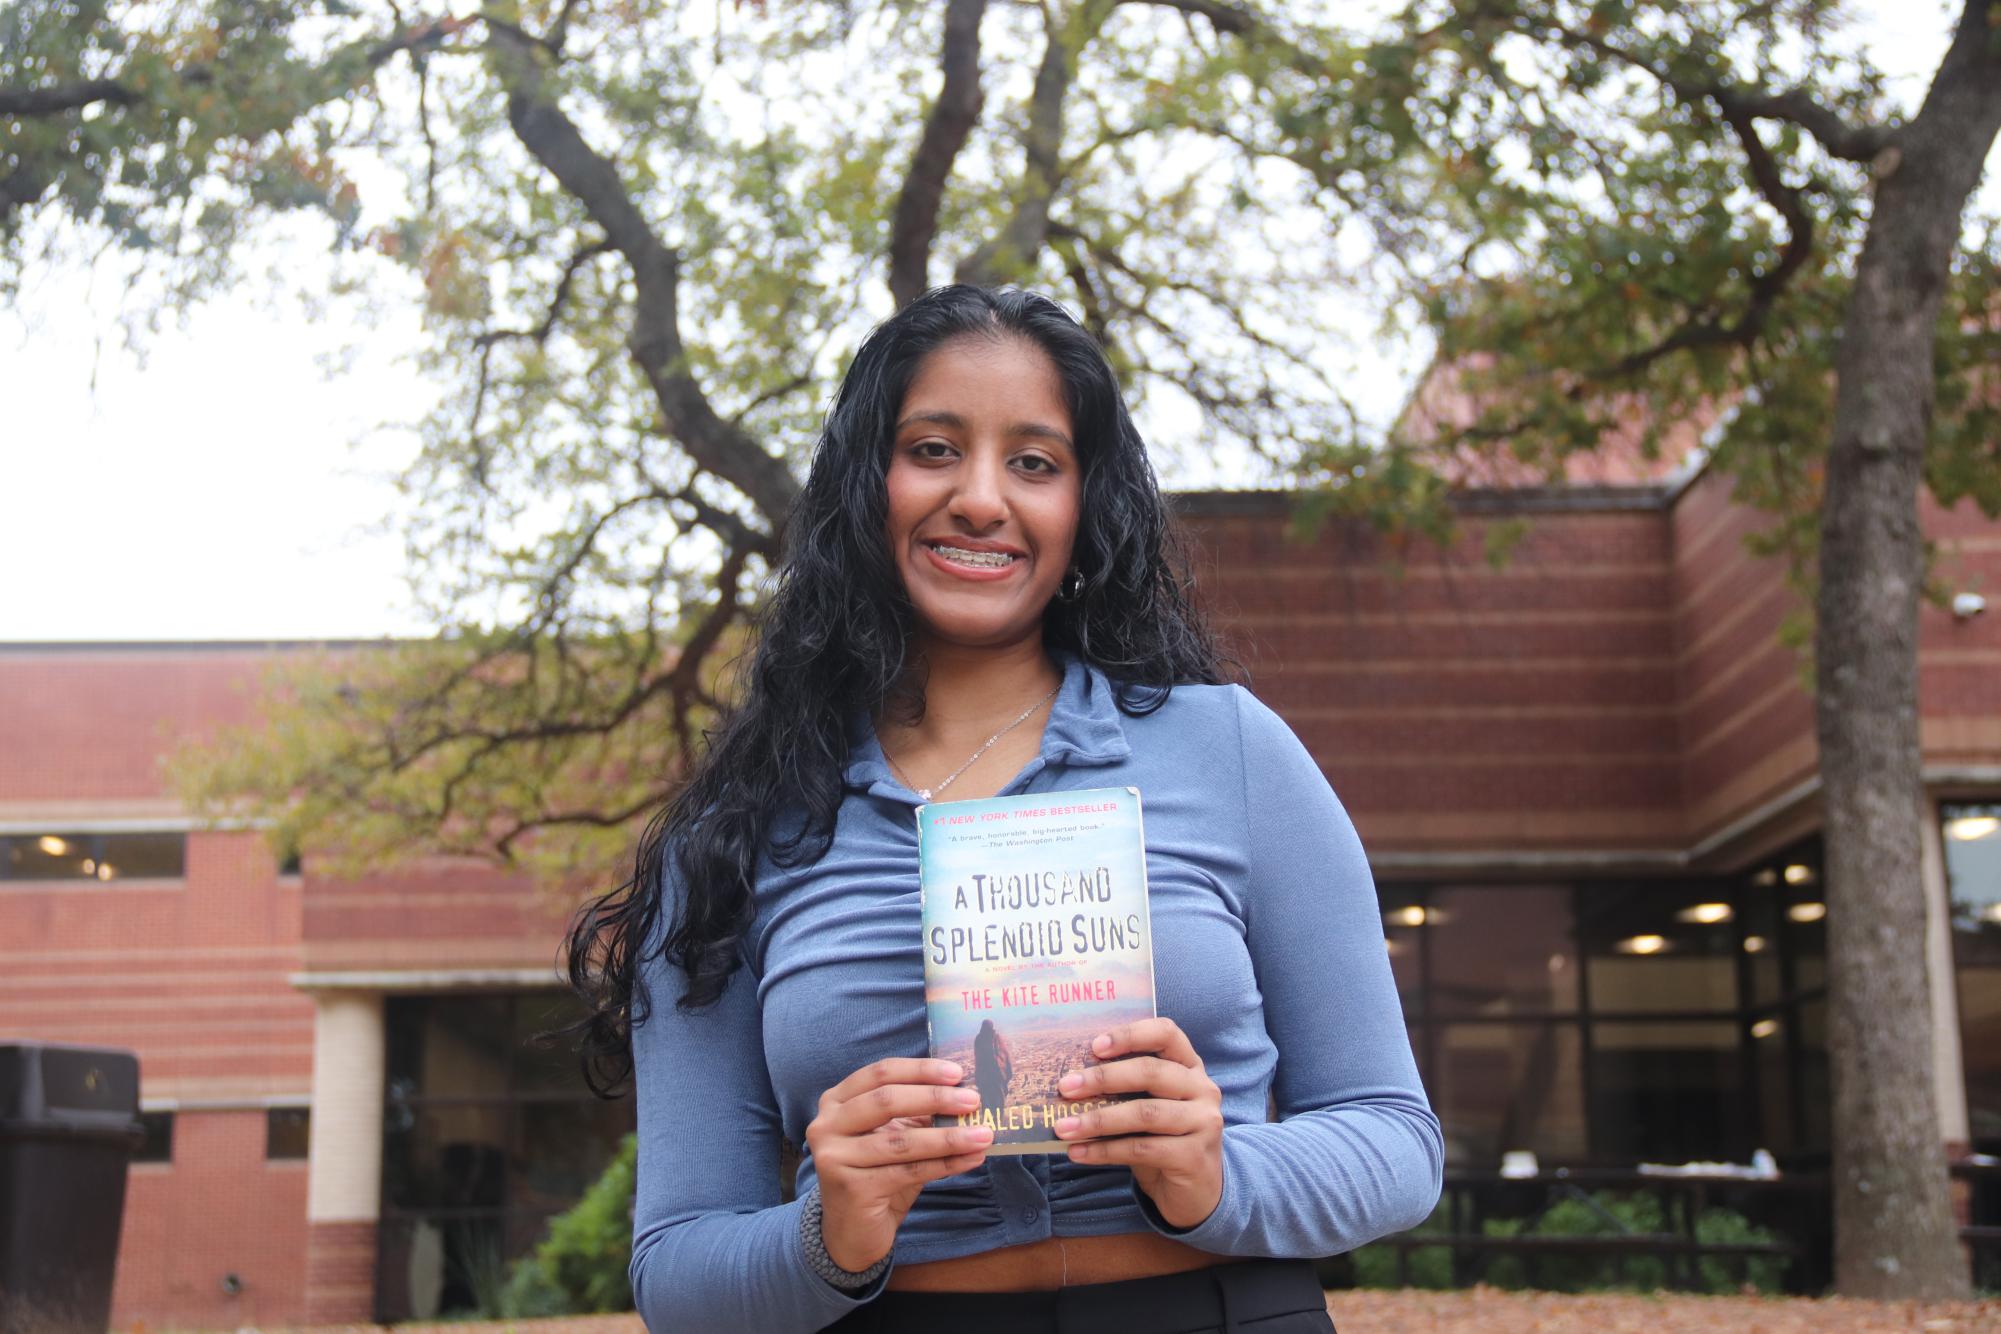 Coppell High School senior Tisya Yadav was named among the 1,514 semifinalists in the Coca-Cola Scholarship out of a pool of 103,800 students nationwide for her excellence and skills.